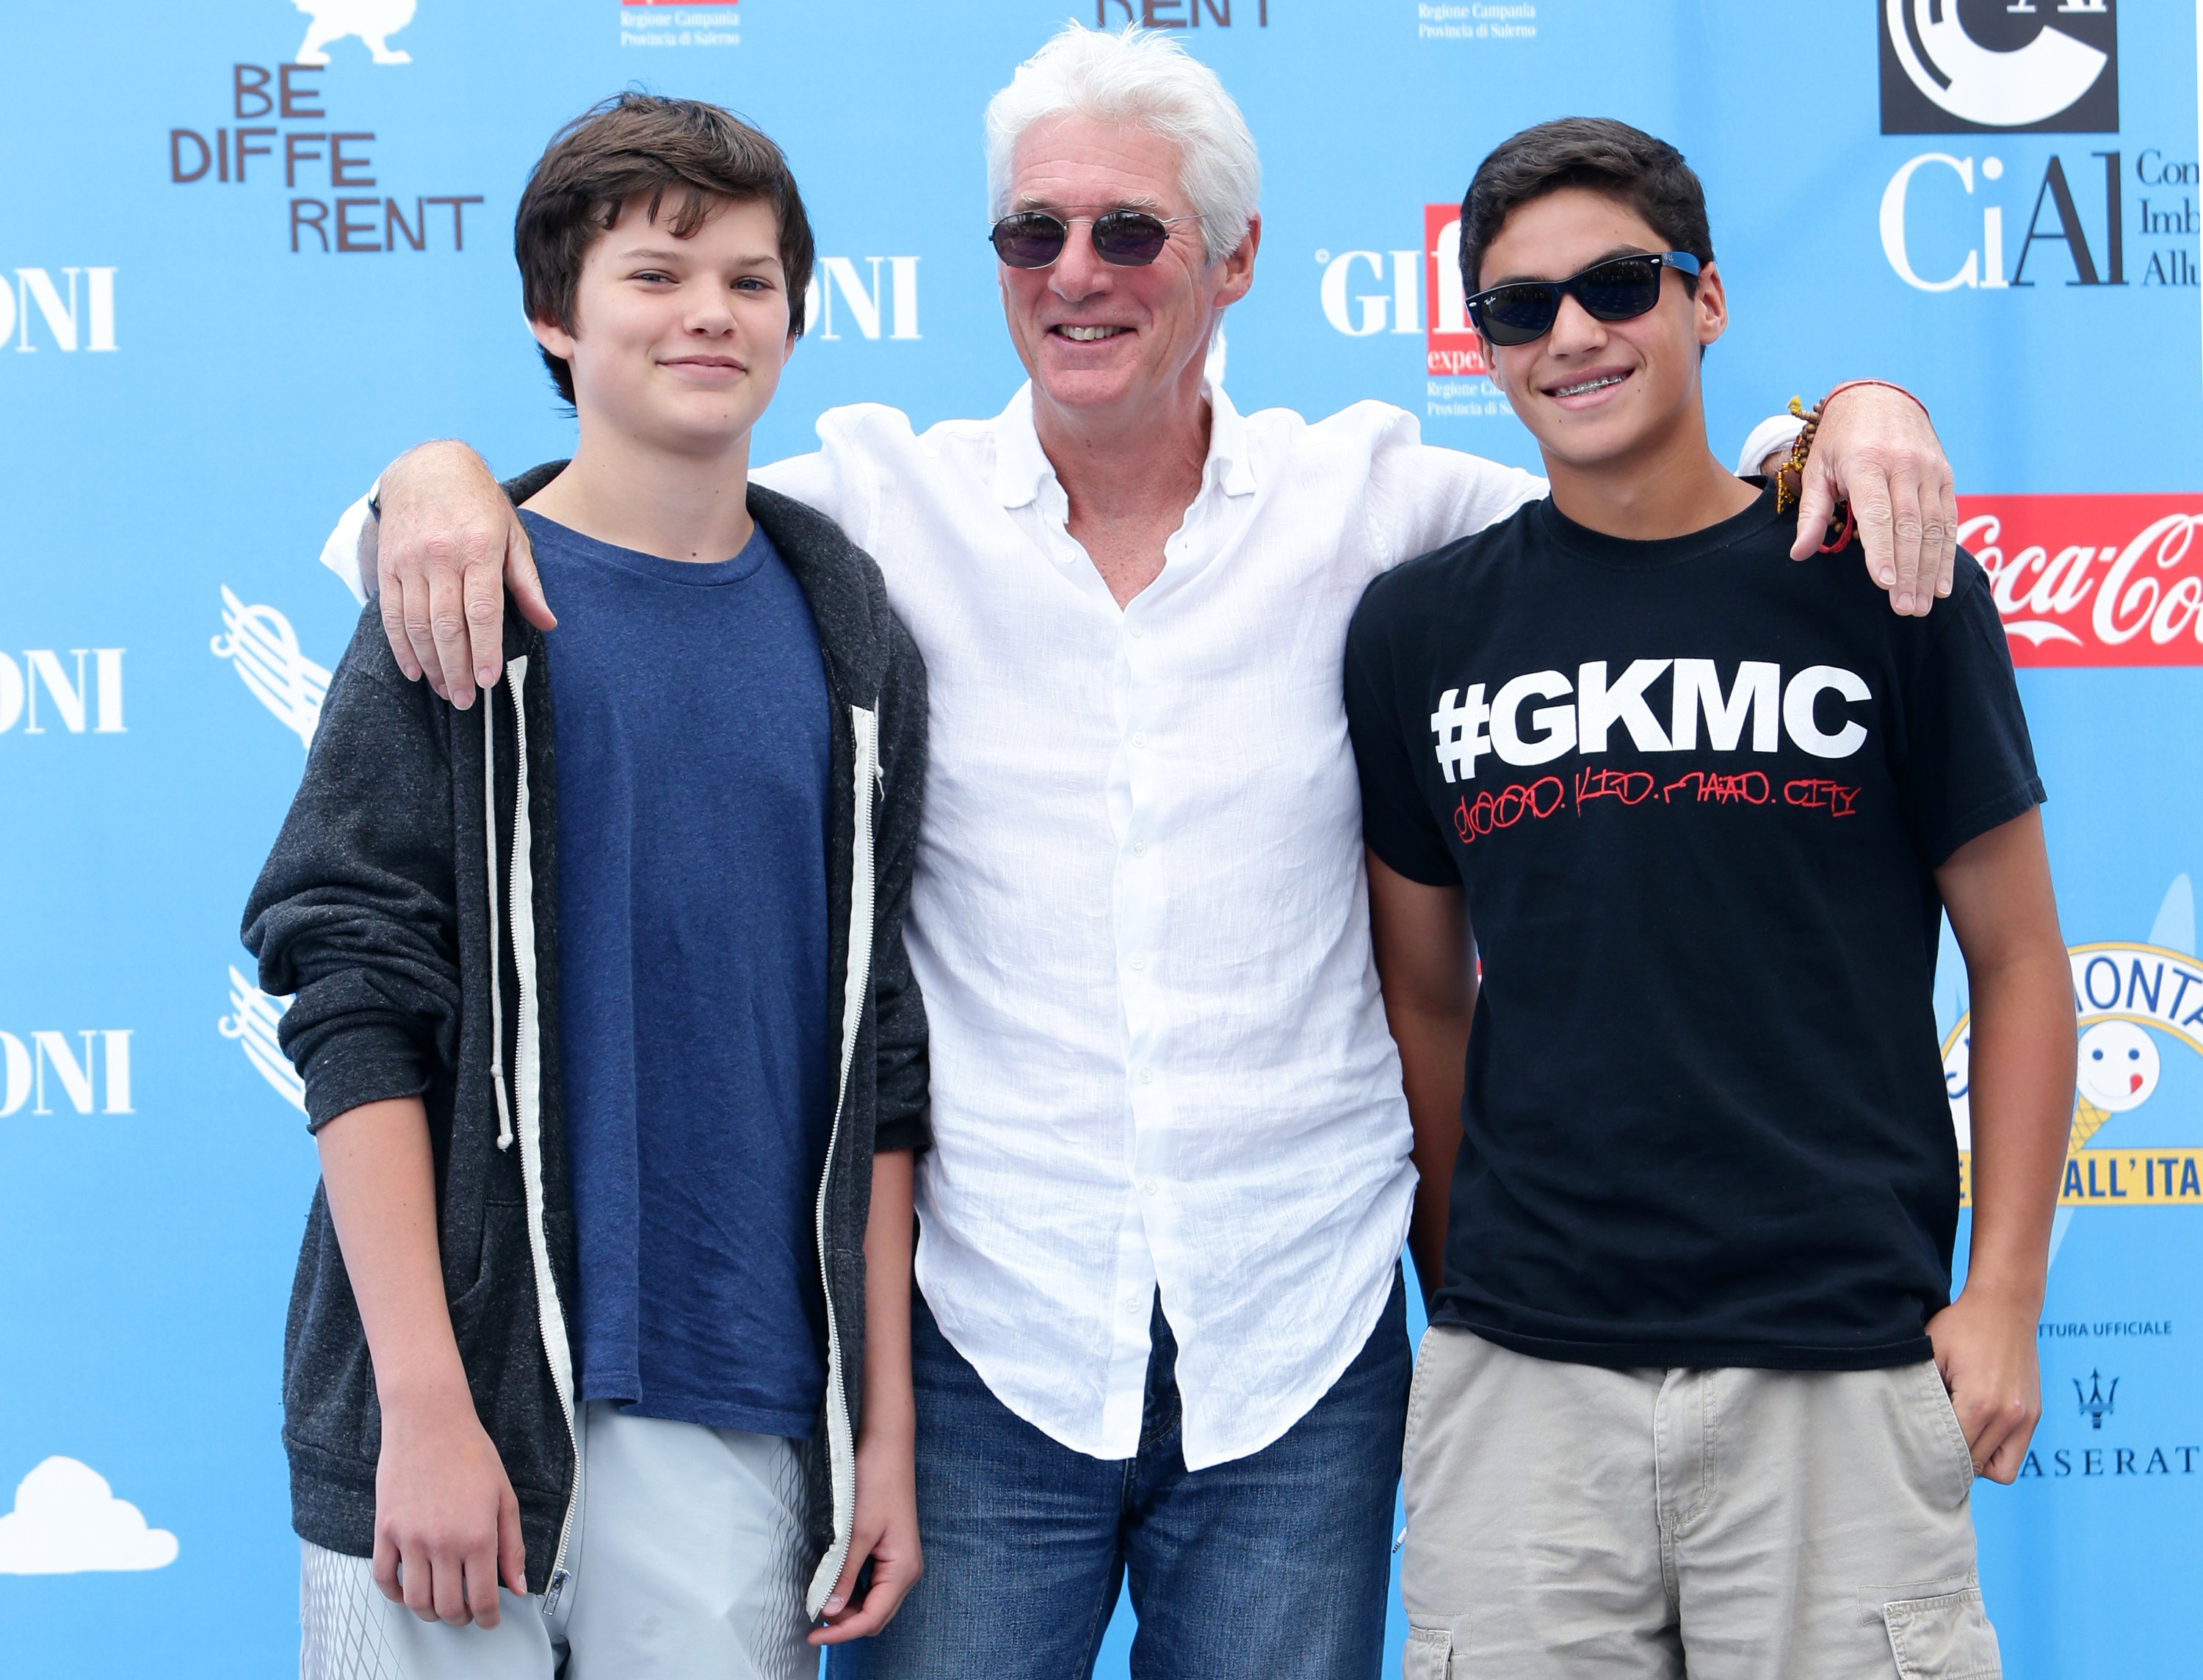 Richard Gere, his son Homer James Jigme Gere and a friend at Giffoni Film Festival photocall on July 22, 2014 in Giffoni Valle Piana, Italy. | Source: Getty Images